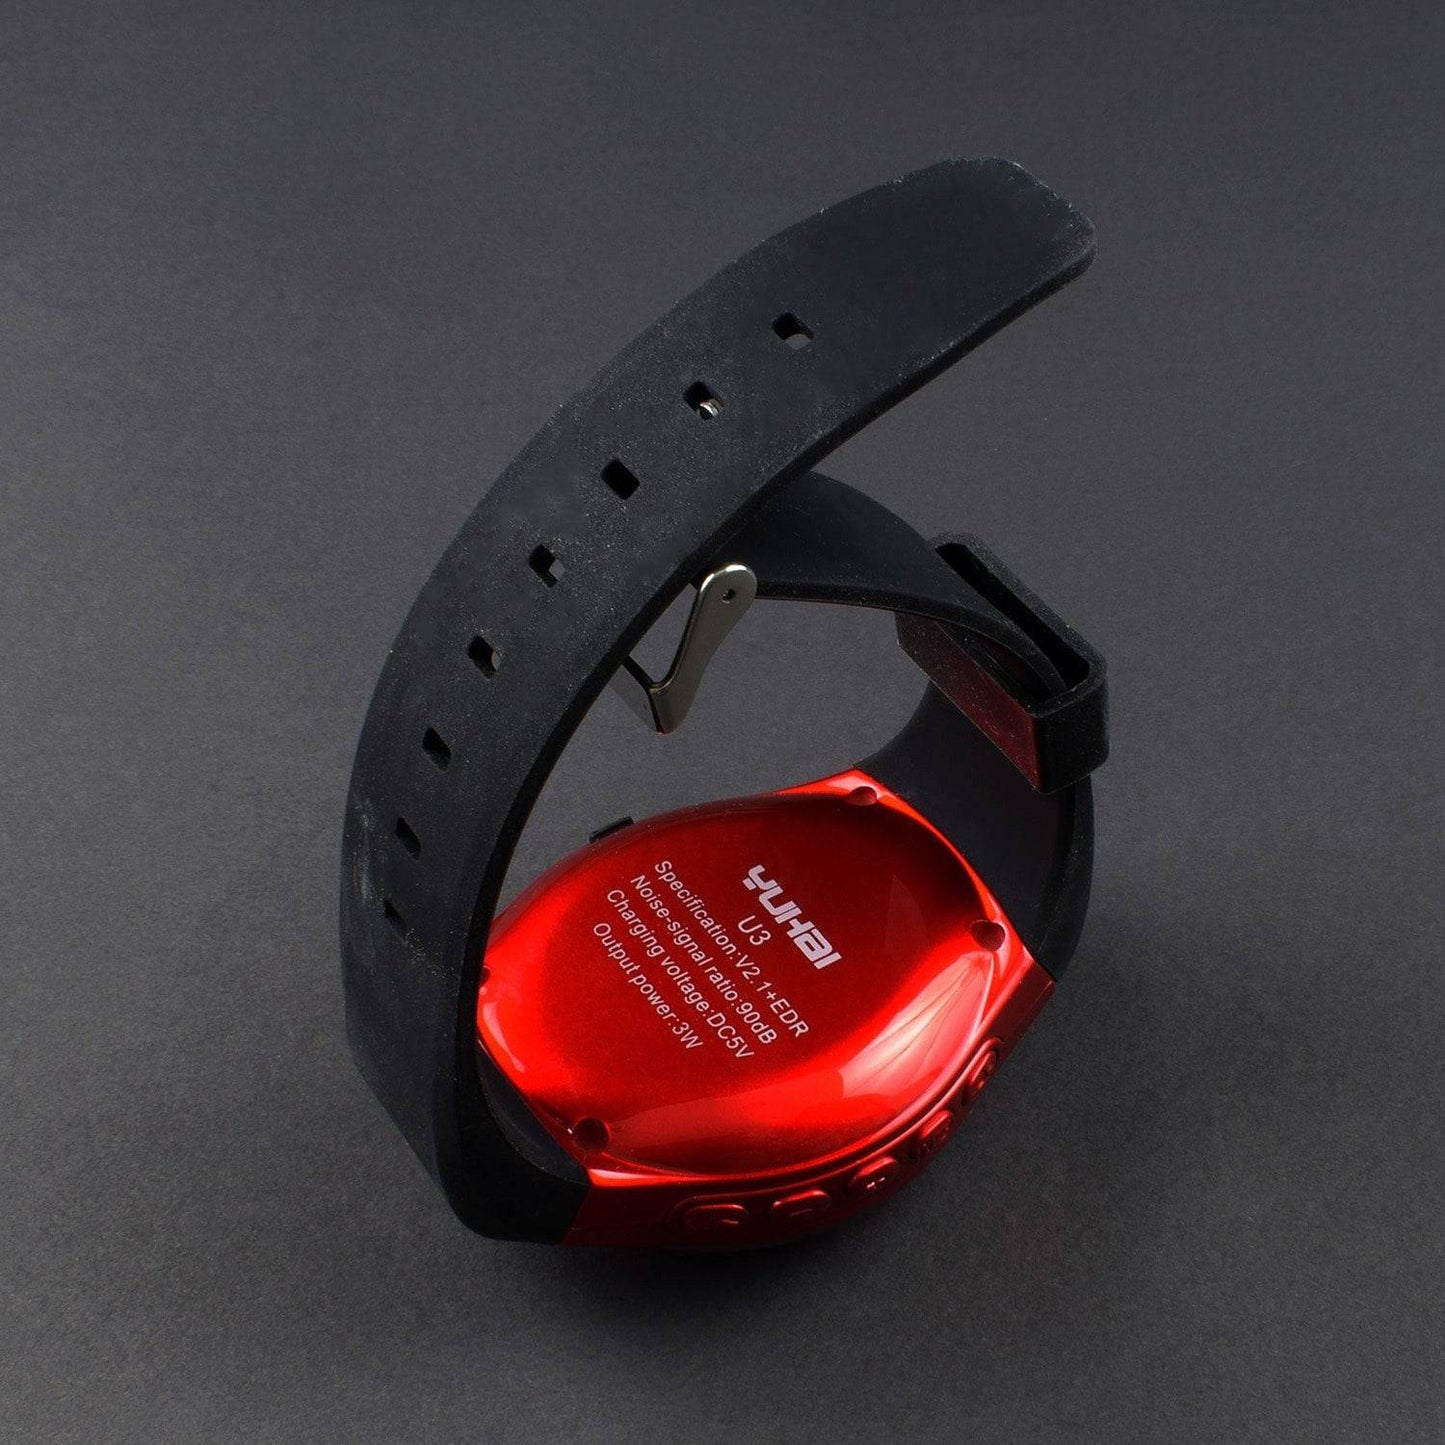 Portable Wireless Bluetooth Speaker Watch with MP3 Music Player, Hands-free call, Radio, Supporting USB, TF Card ( red) - RS212 - REES52